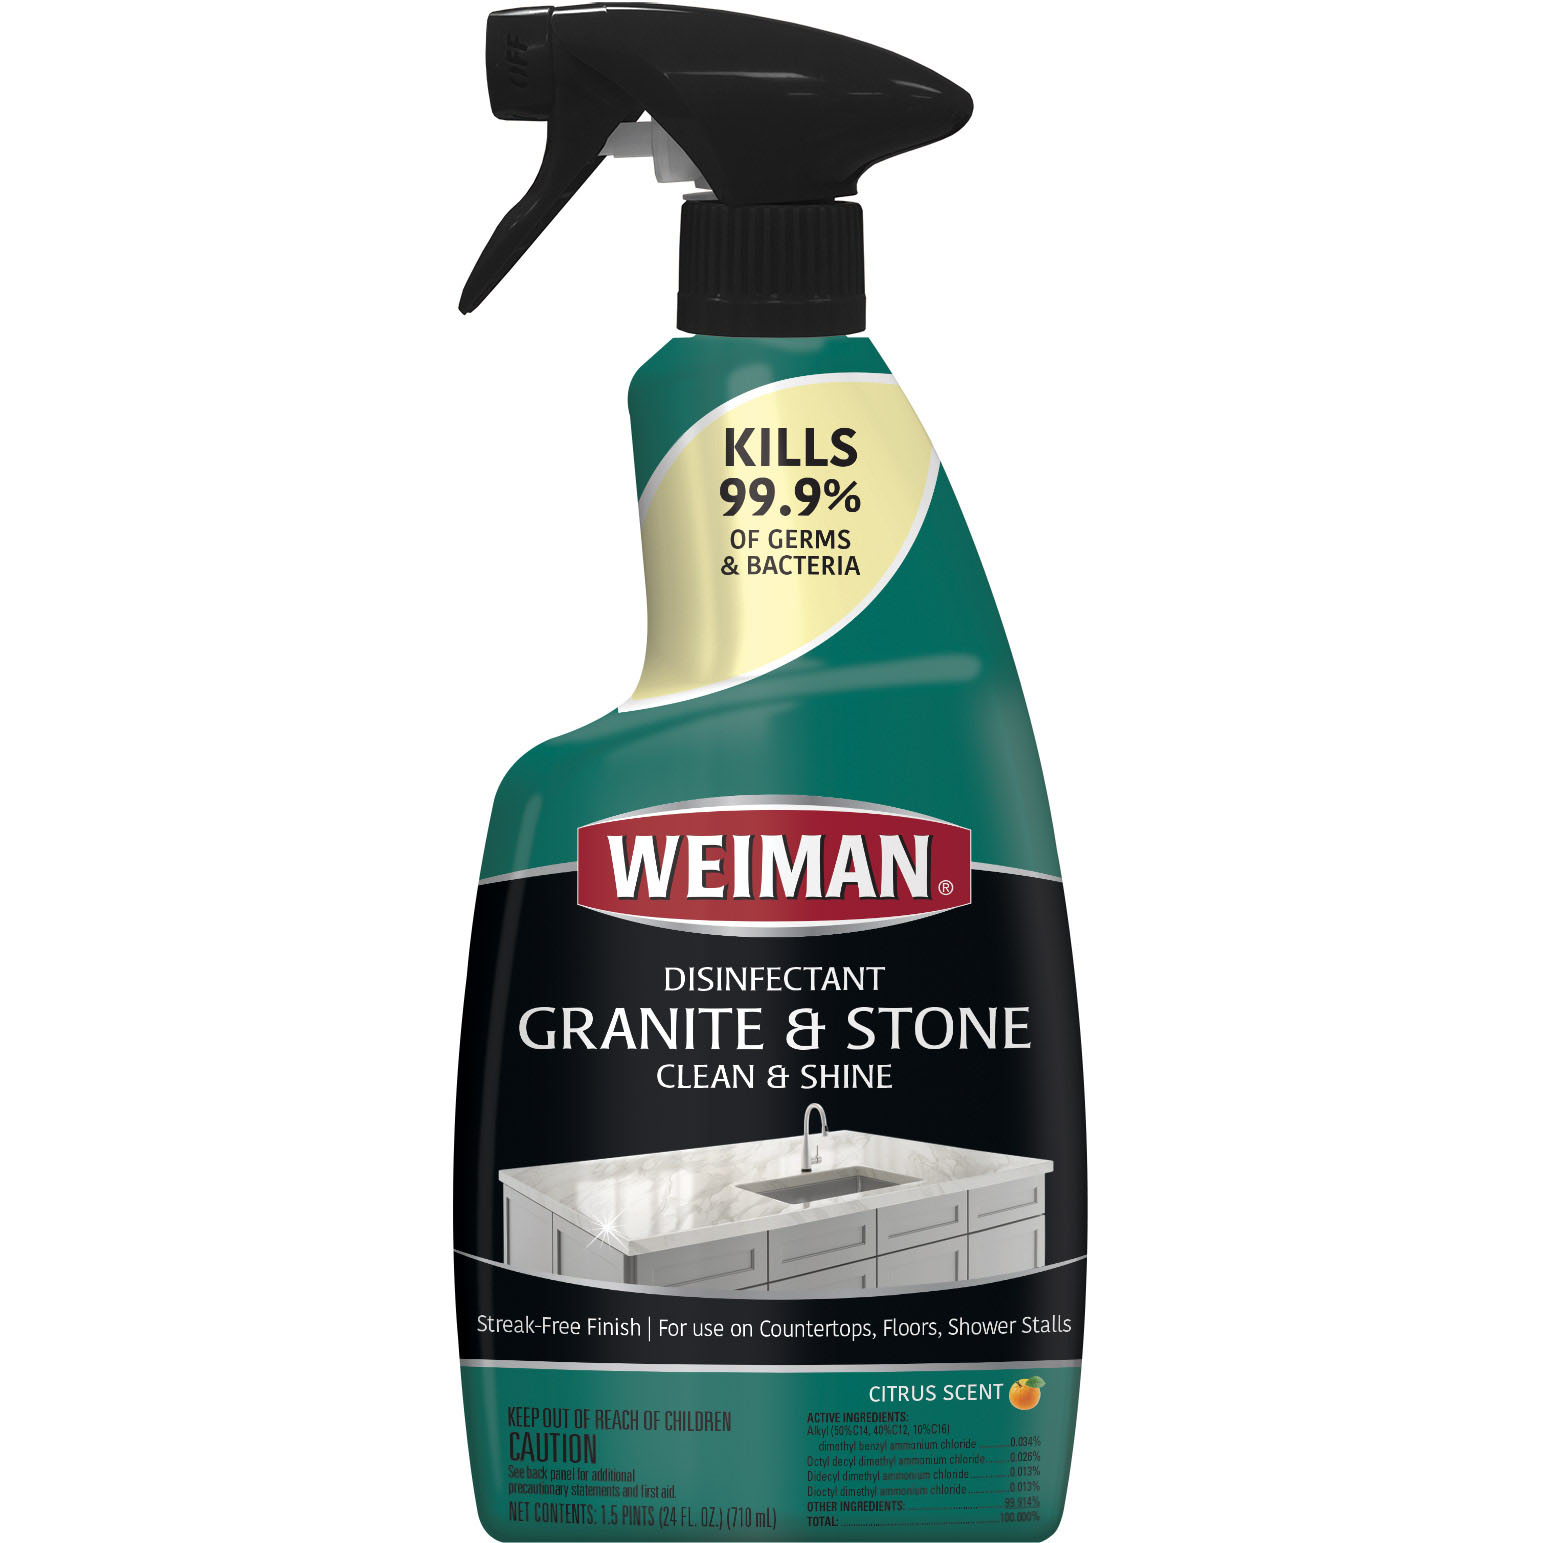  Natural Stone Grout Cleaner, Safe for Marble, Travertine,  Limestone, Tile Spray on Grout Cleaner. (32 oz.) : Tools & Home Improvement